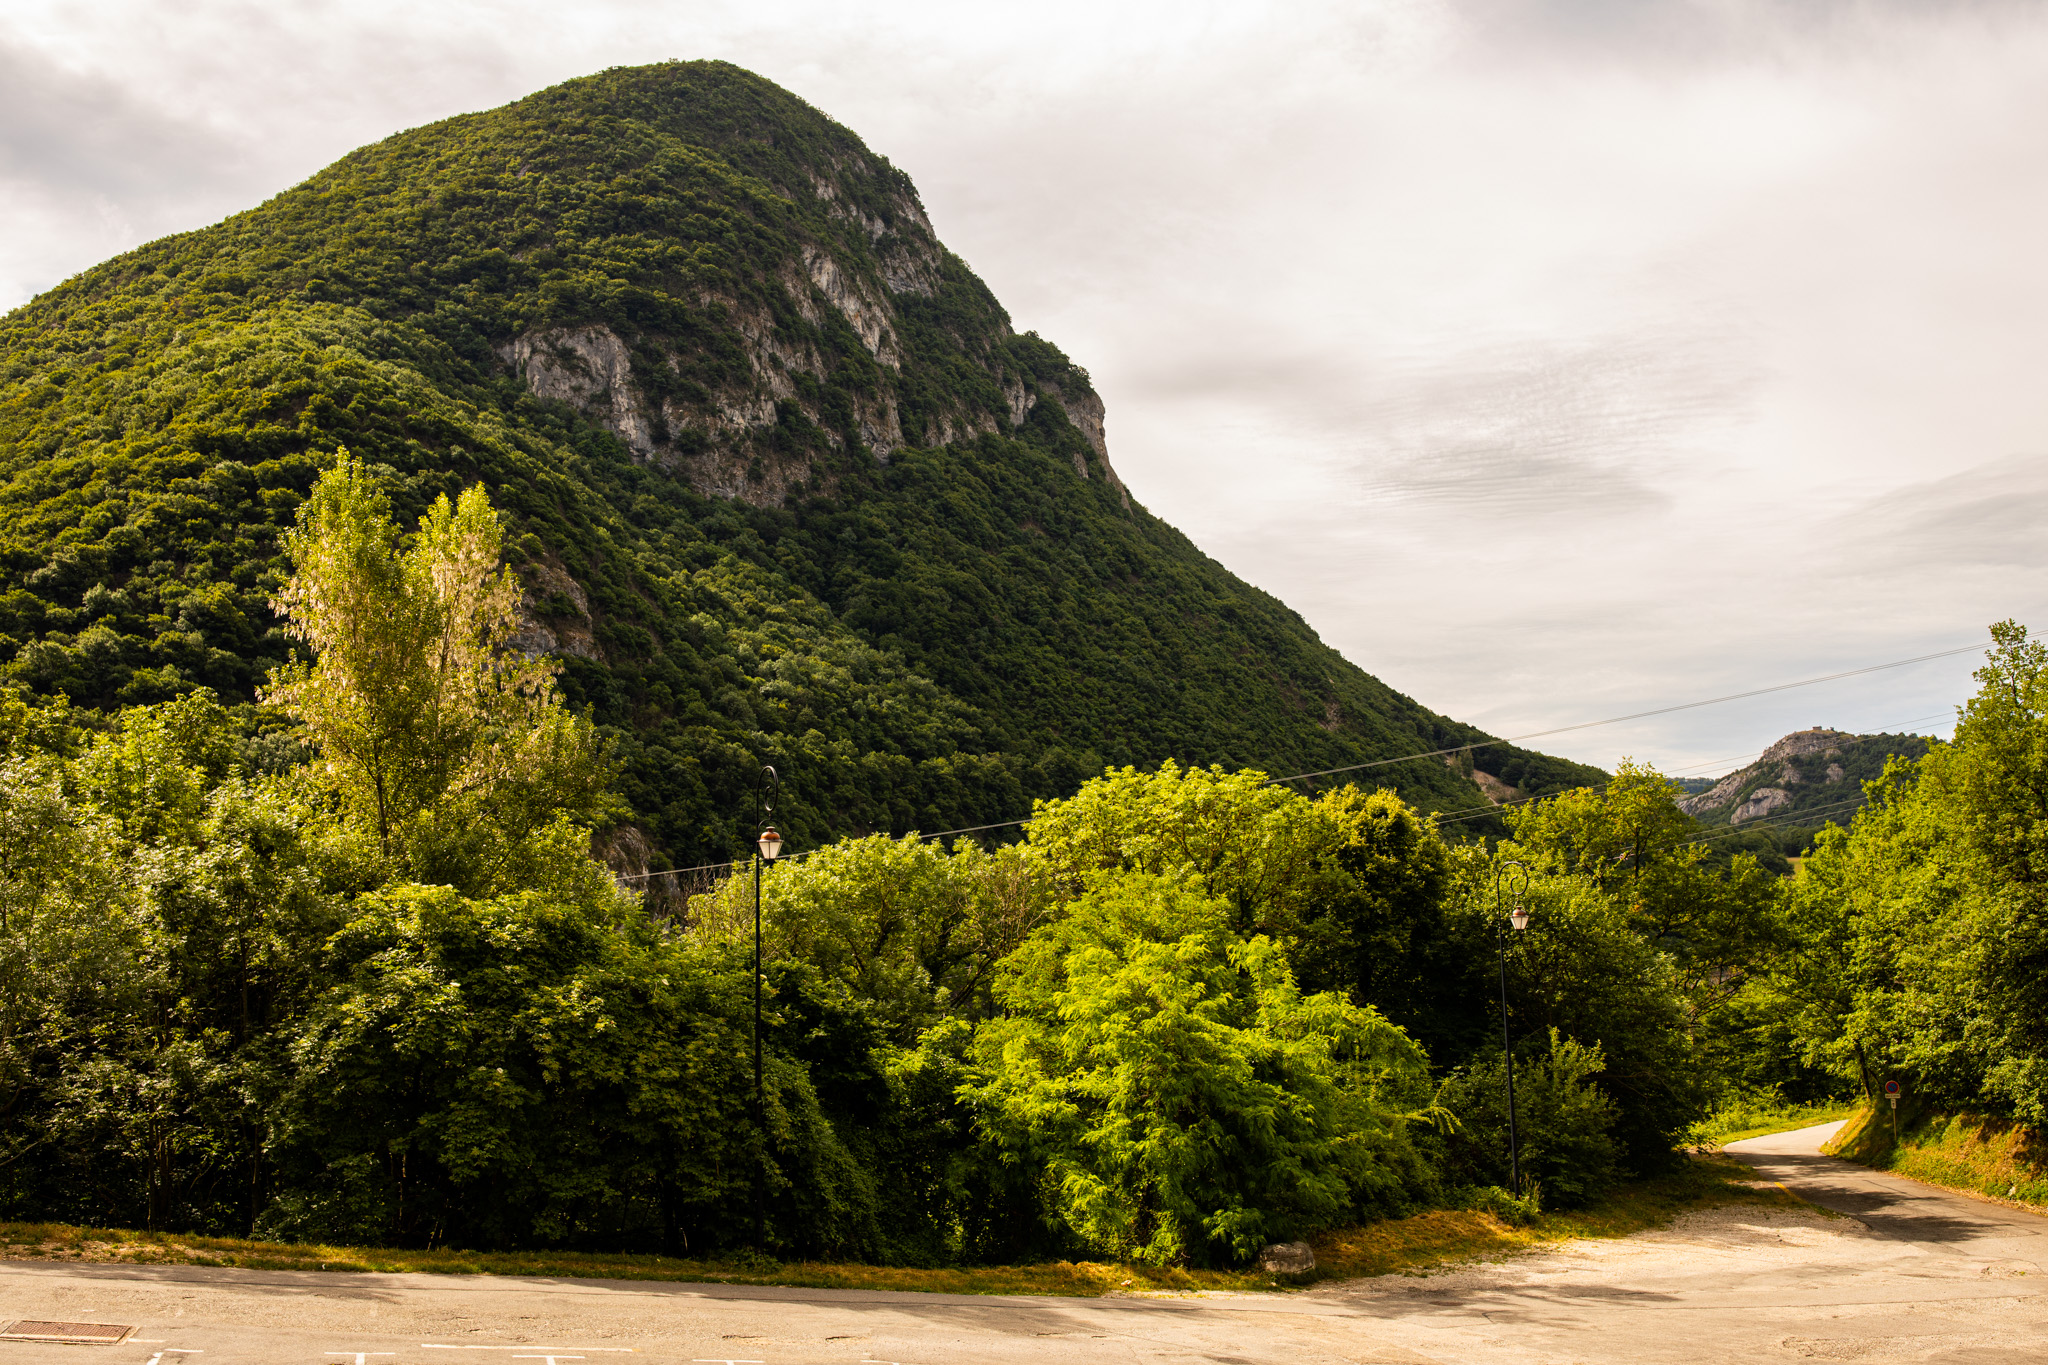 General 2048x1365 photography nature outdoors greenery plants mountains trees forest cliff road